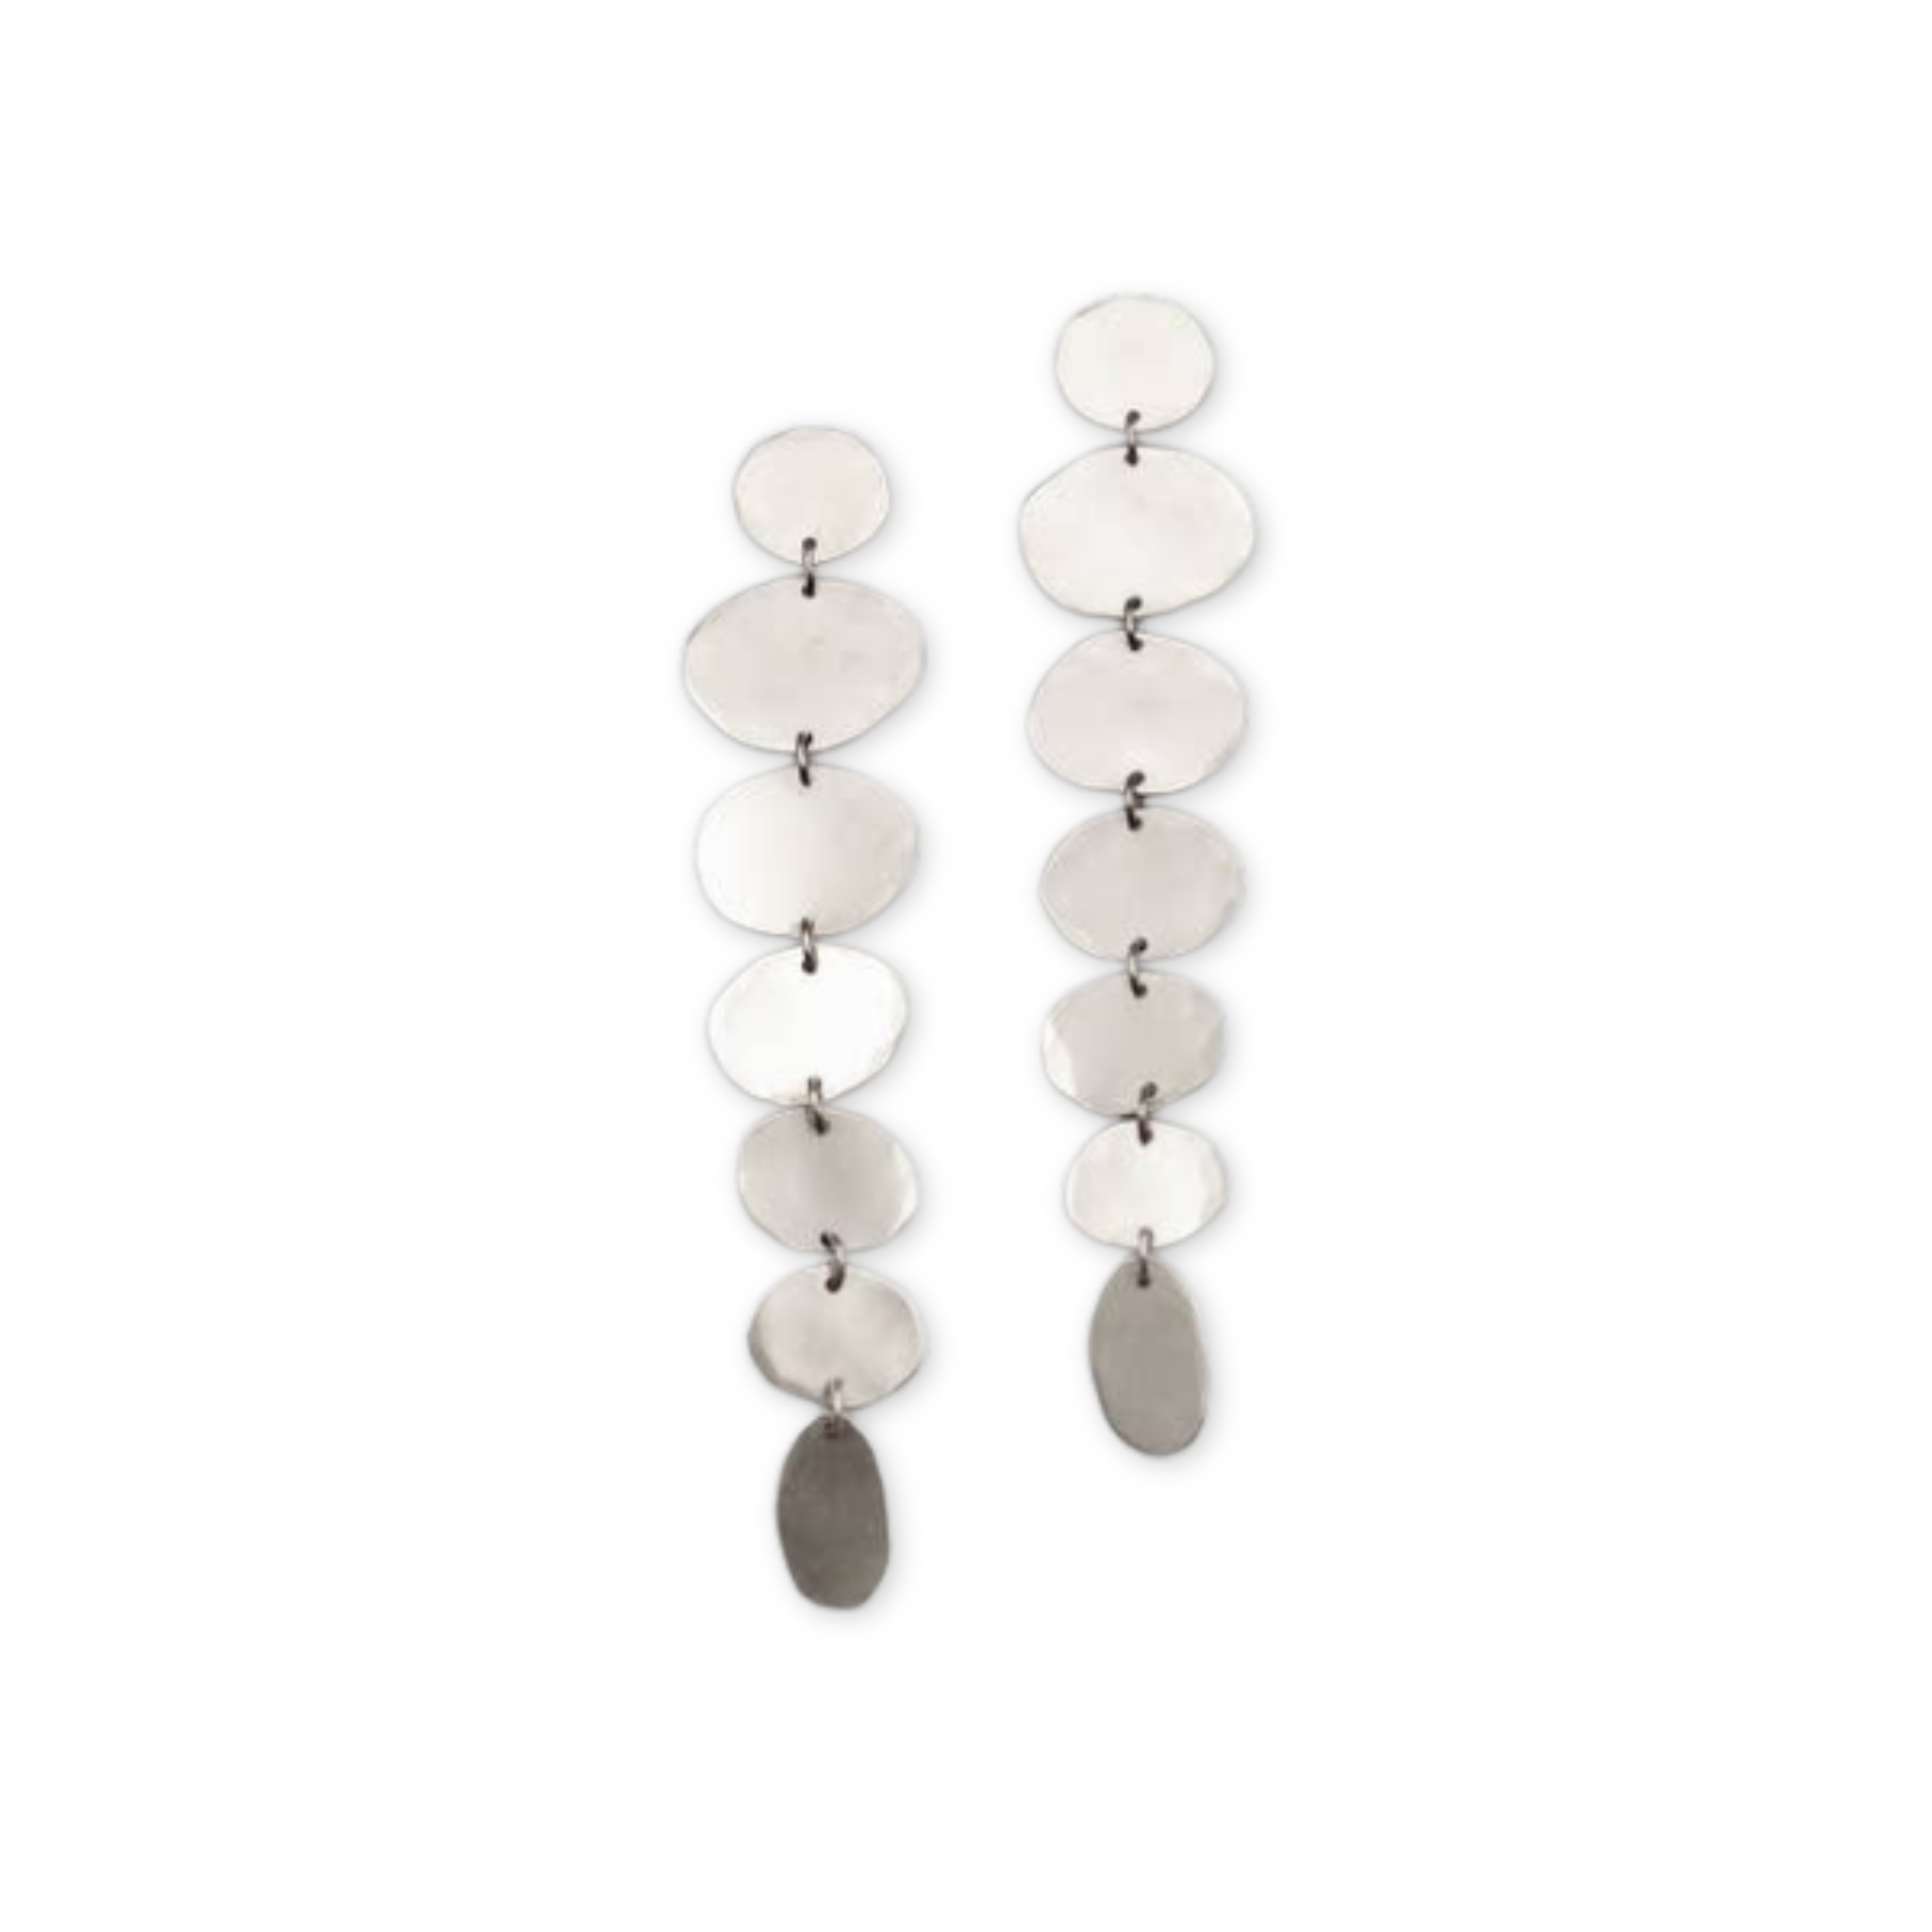 earrings with hanging and cascading organic oval shapes